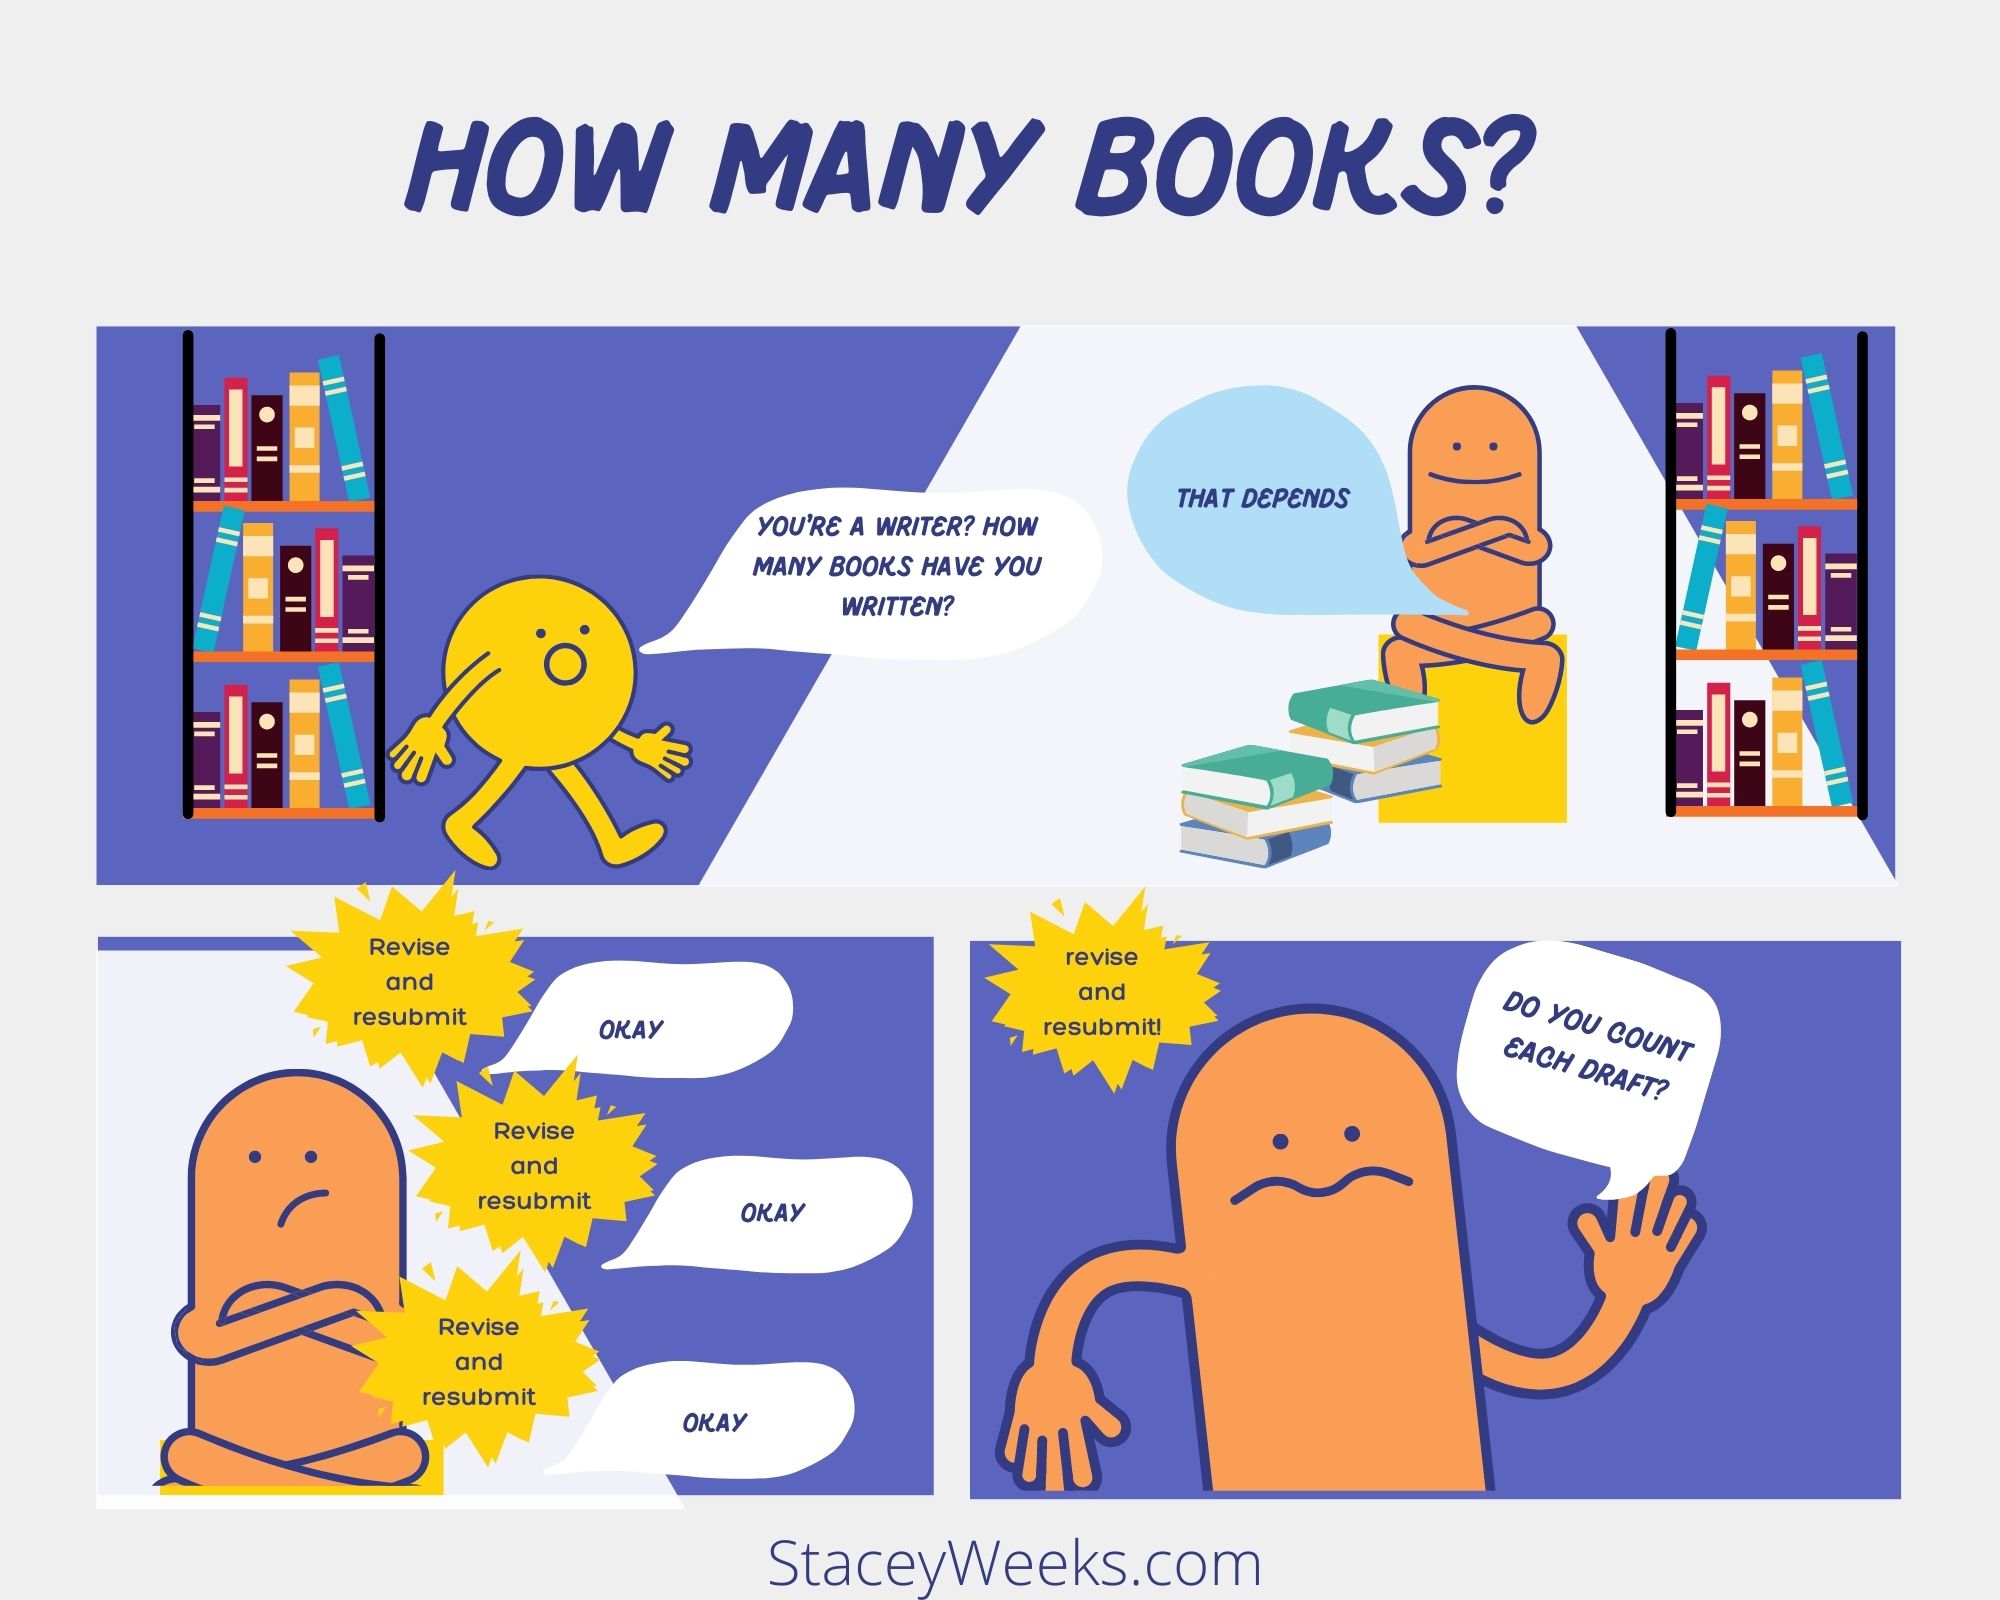 How many books have you written?